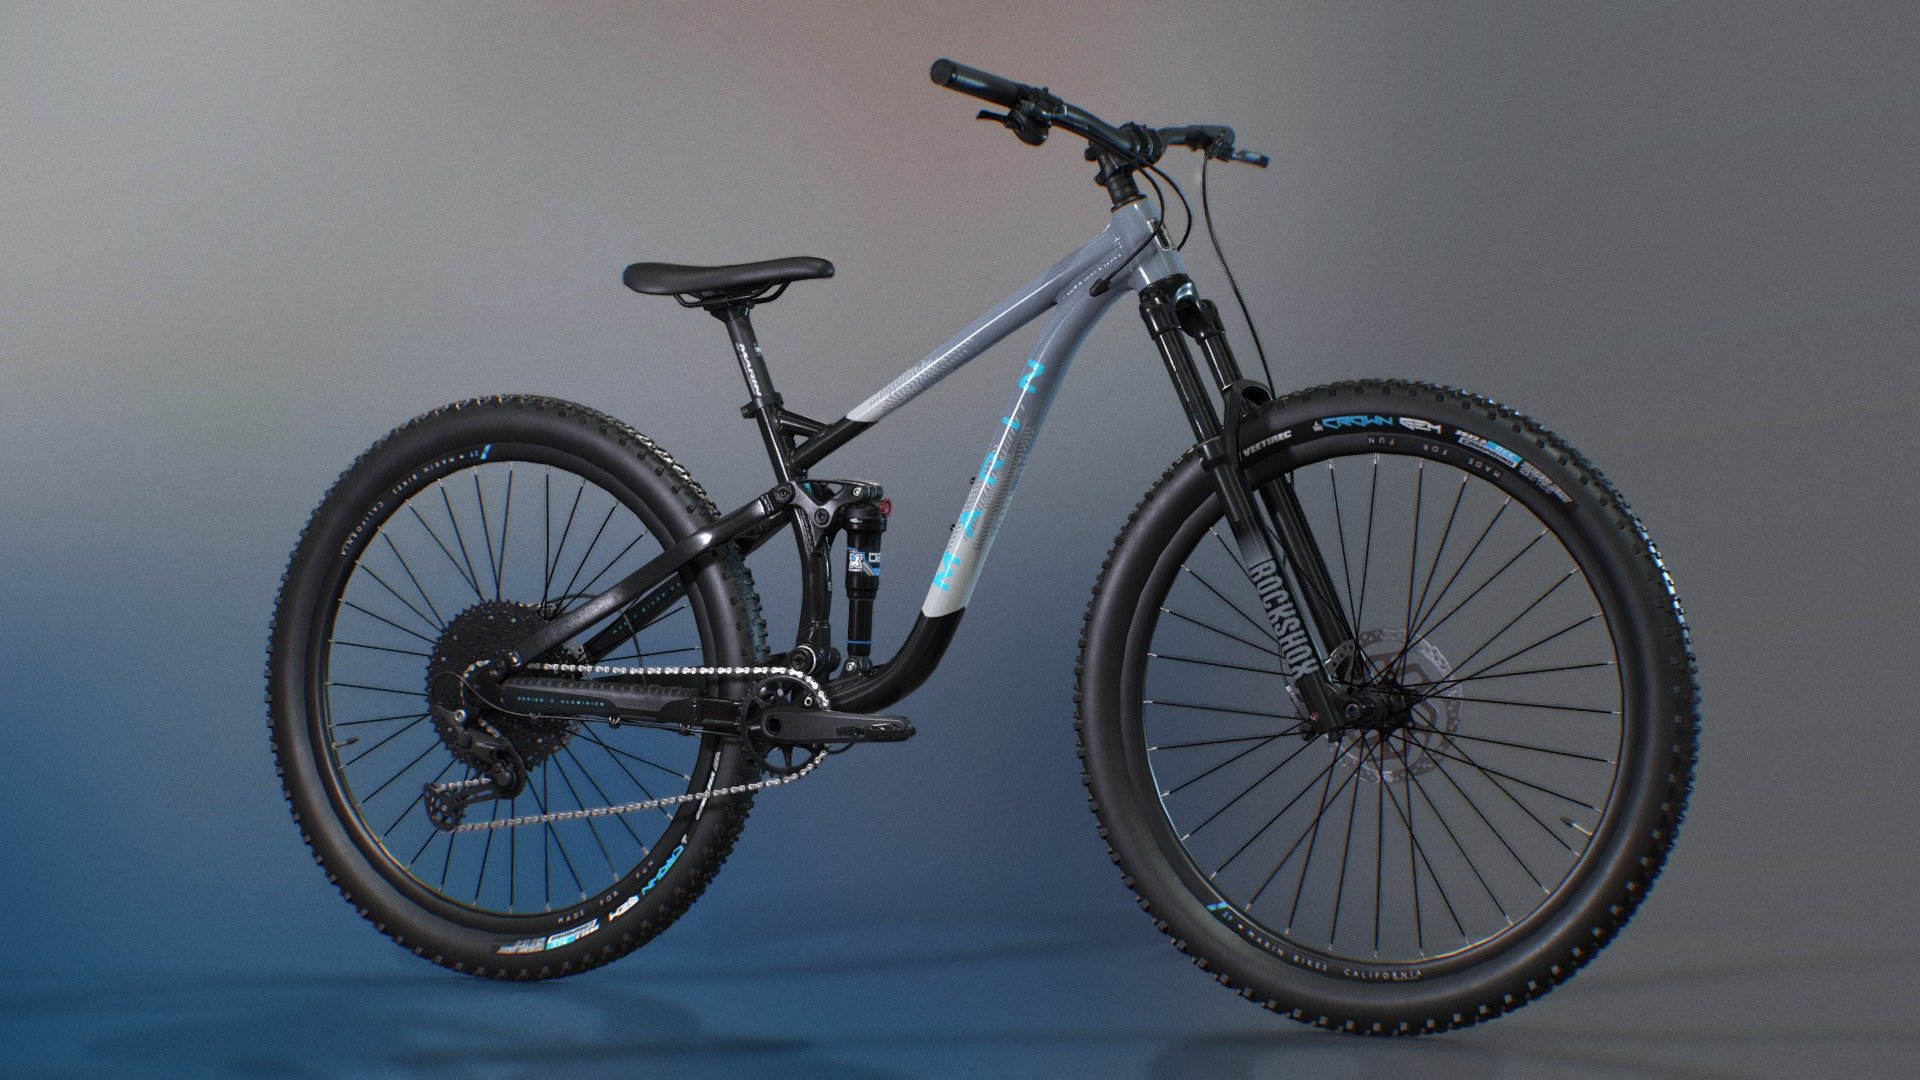 This is my 3d model of Marin mountain bike  ready for using as full suspension trail enduro bikes. It is can be used as a MTB for downhill, enduro, trail, crosscountry in sports racing games and many other product rendering scenes.

This entire bikes consists of many high quality products including MTB full suspension frame, air shock,brake callipers,wheel-sets, disc rotors, front suspension fork, seatpost, handlebars with headset-stem,spacers,brake levers,shifters,grip,drivetrain,pedals,etc all in one single pack.

This 3dmodel is rigged and functions like a real accurate linkage driven mechanism.

This model is created in 3dsMax and textured in Substance Painter.

This model is made in real proportions.

High quality of PBR texture maps are available to download 3d model